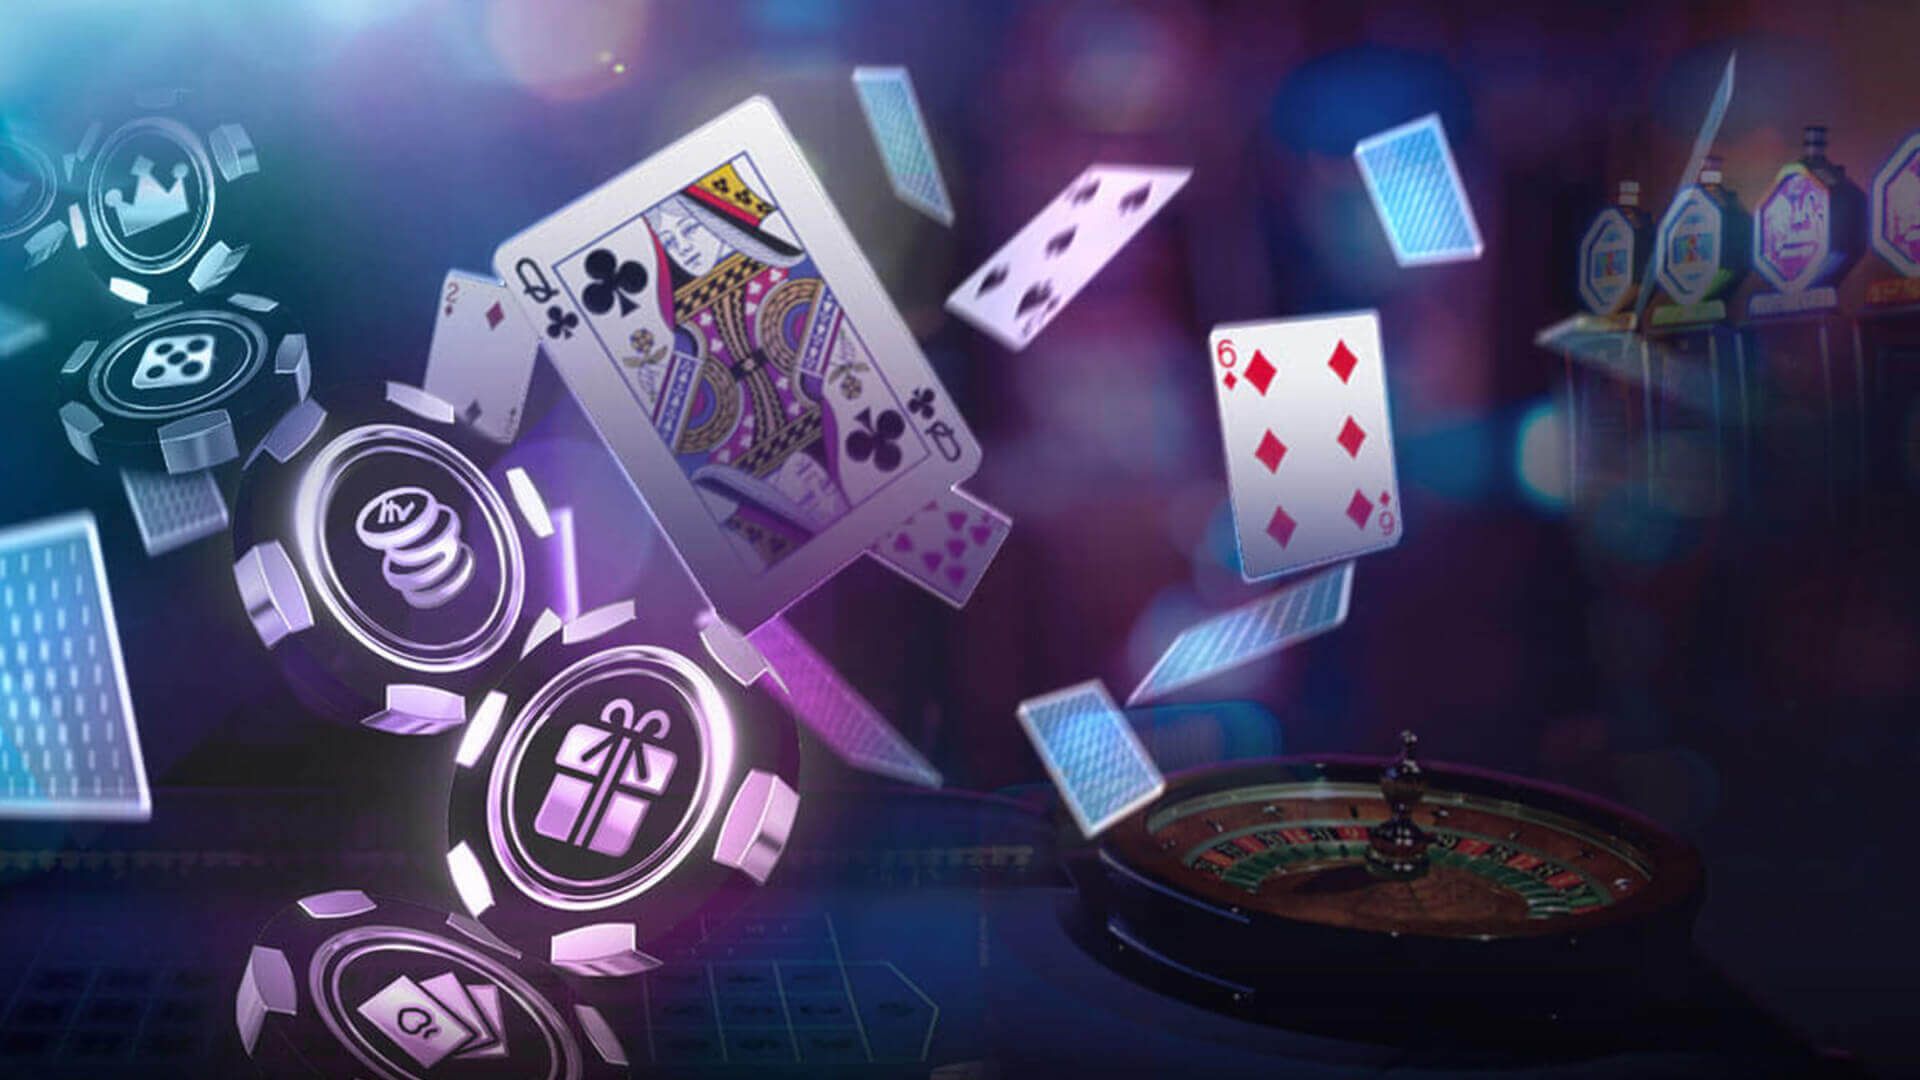 The most popular online casino software developers